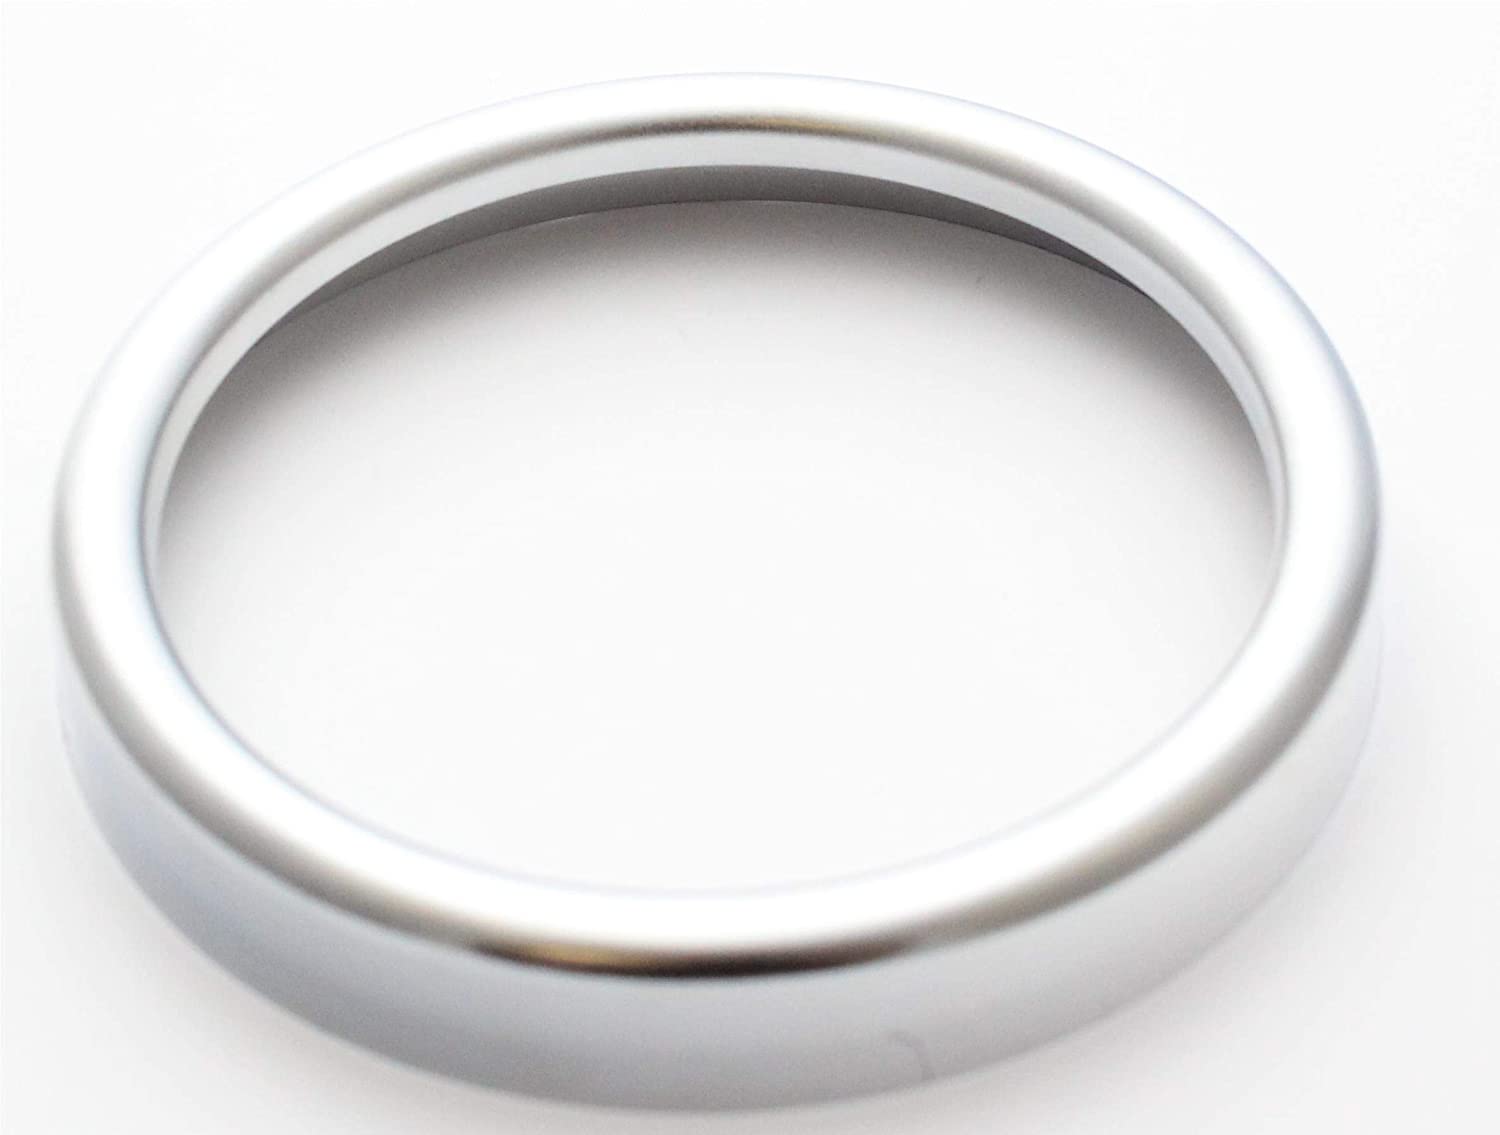 Replacement Planetary Drop Ring with Polished Finish (240285-2) for KitchenAid Rocker Mixer (Artisan, KSM90, Classic, K45, K45SS etc.)